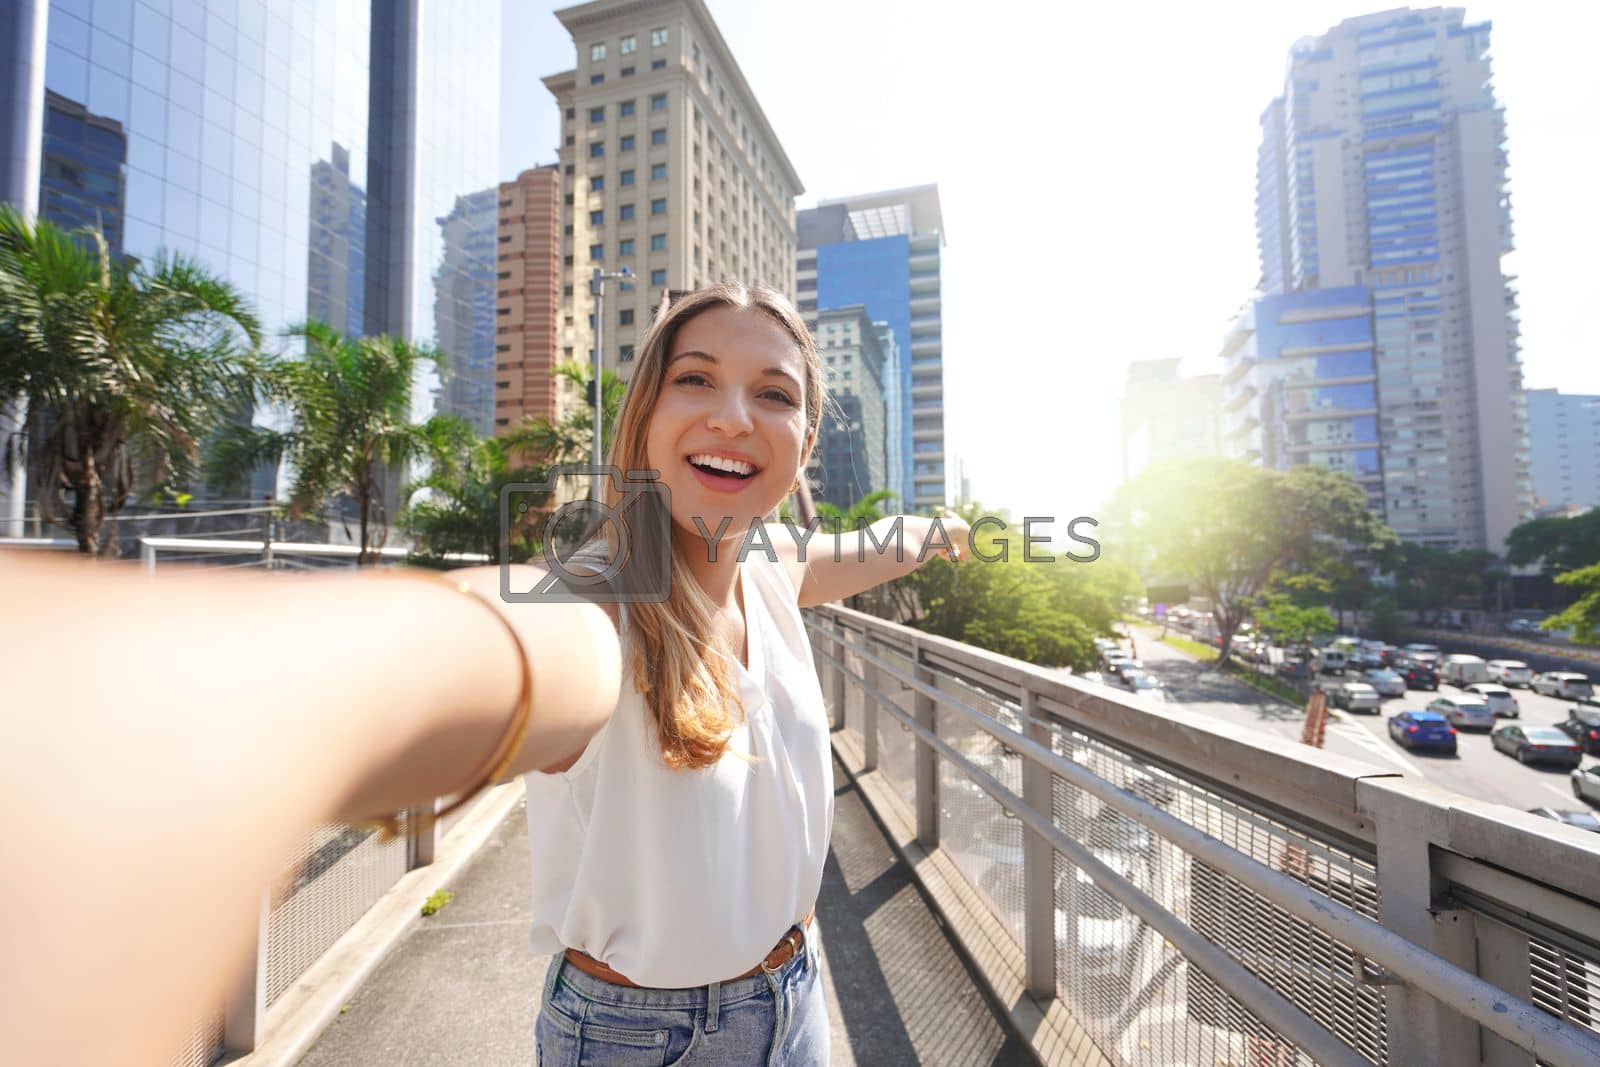 Royalty free image of Travel in Sao Paulo, Brazil. Beautiful smiling girl takes self portrait in Sao Paulo sustainable metropolis, Brazil. by sergio_monti